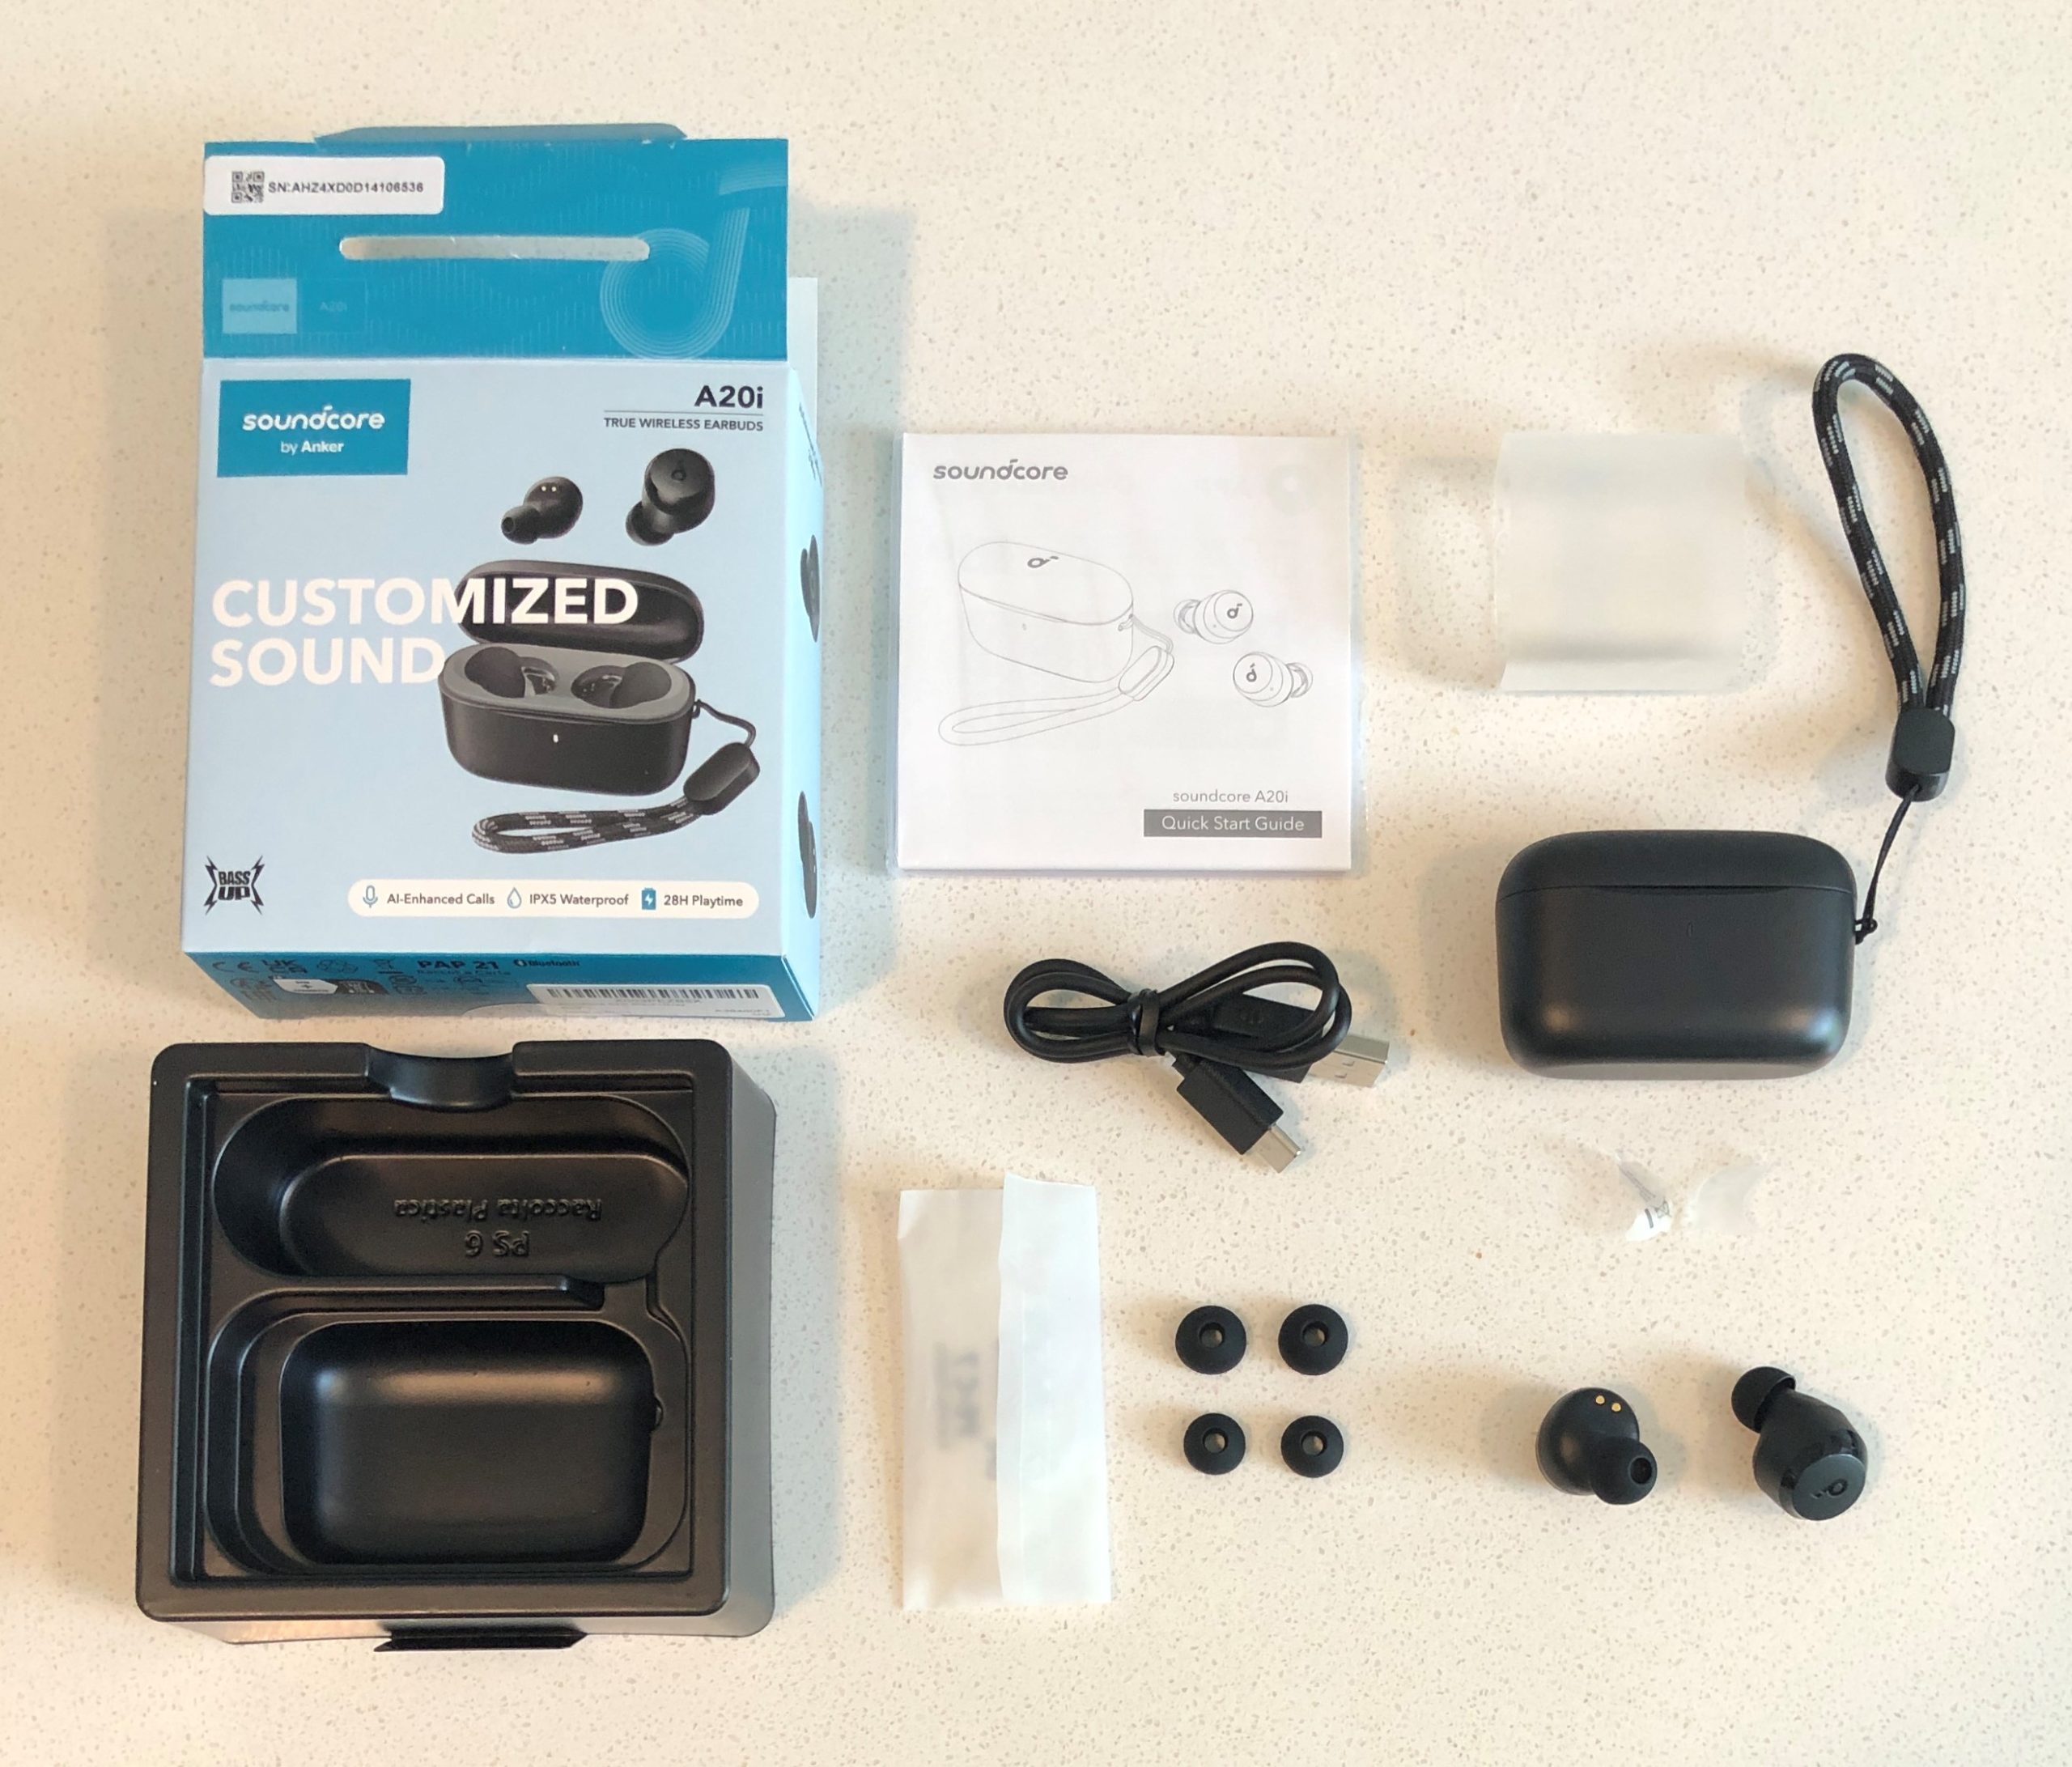 Soundcore A20i unboxed accessories